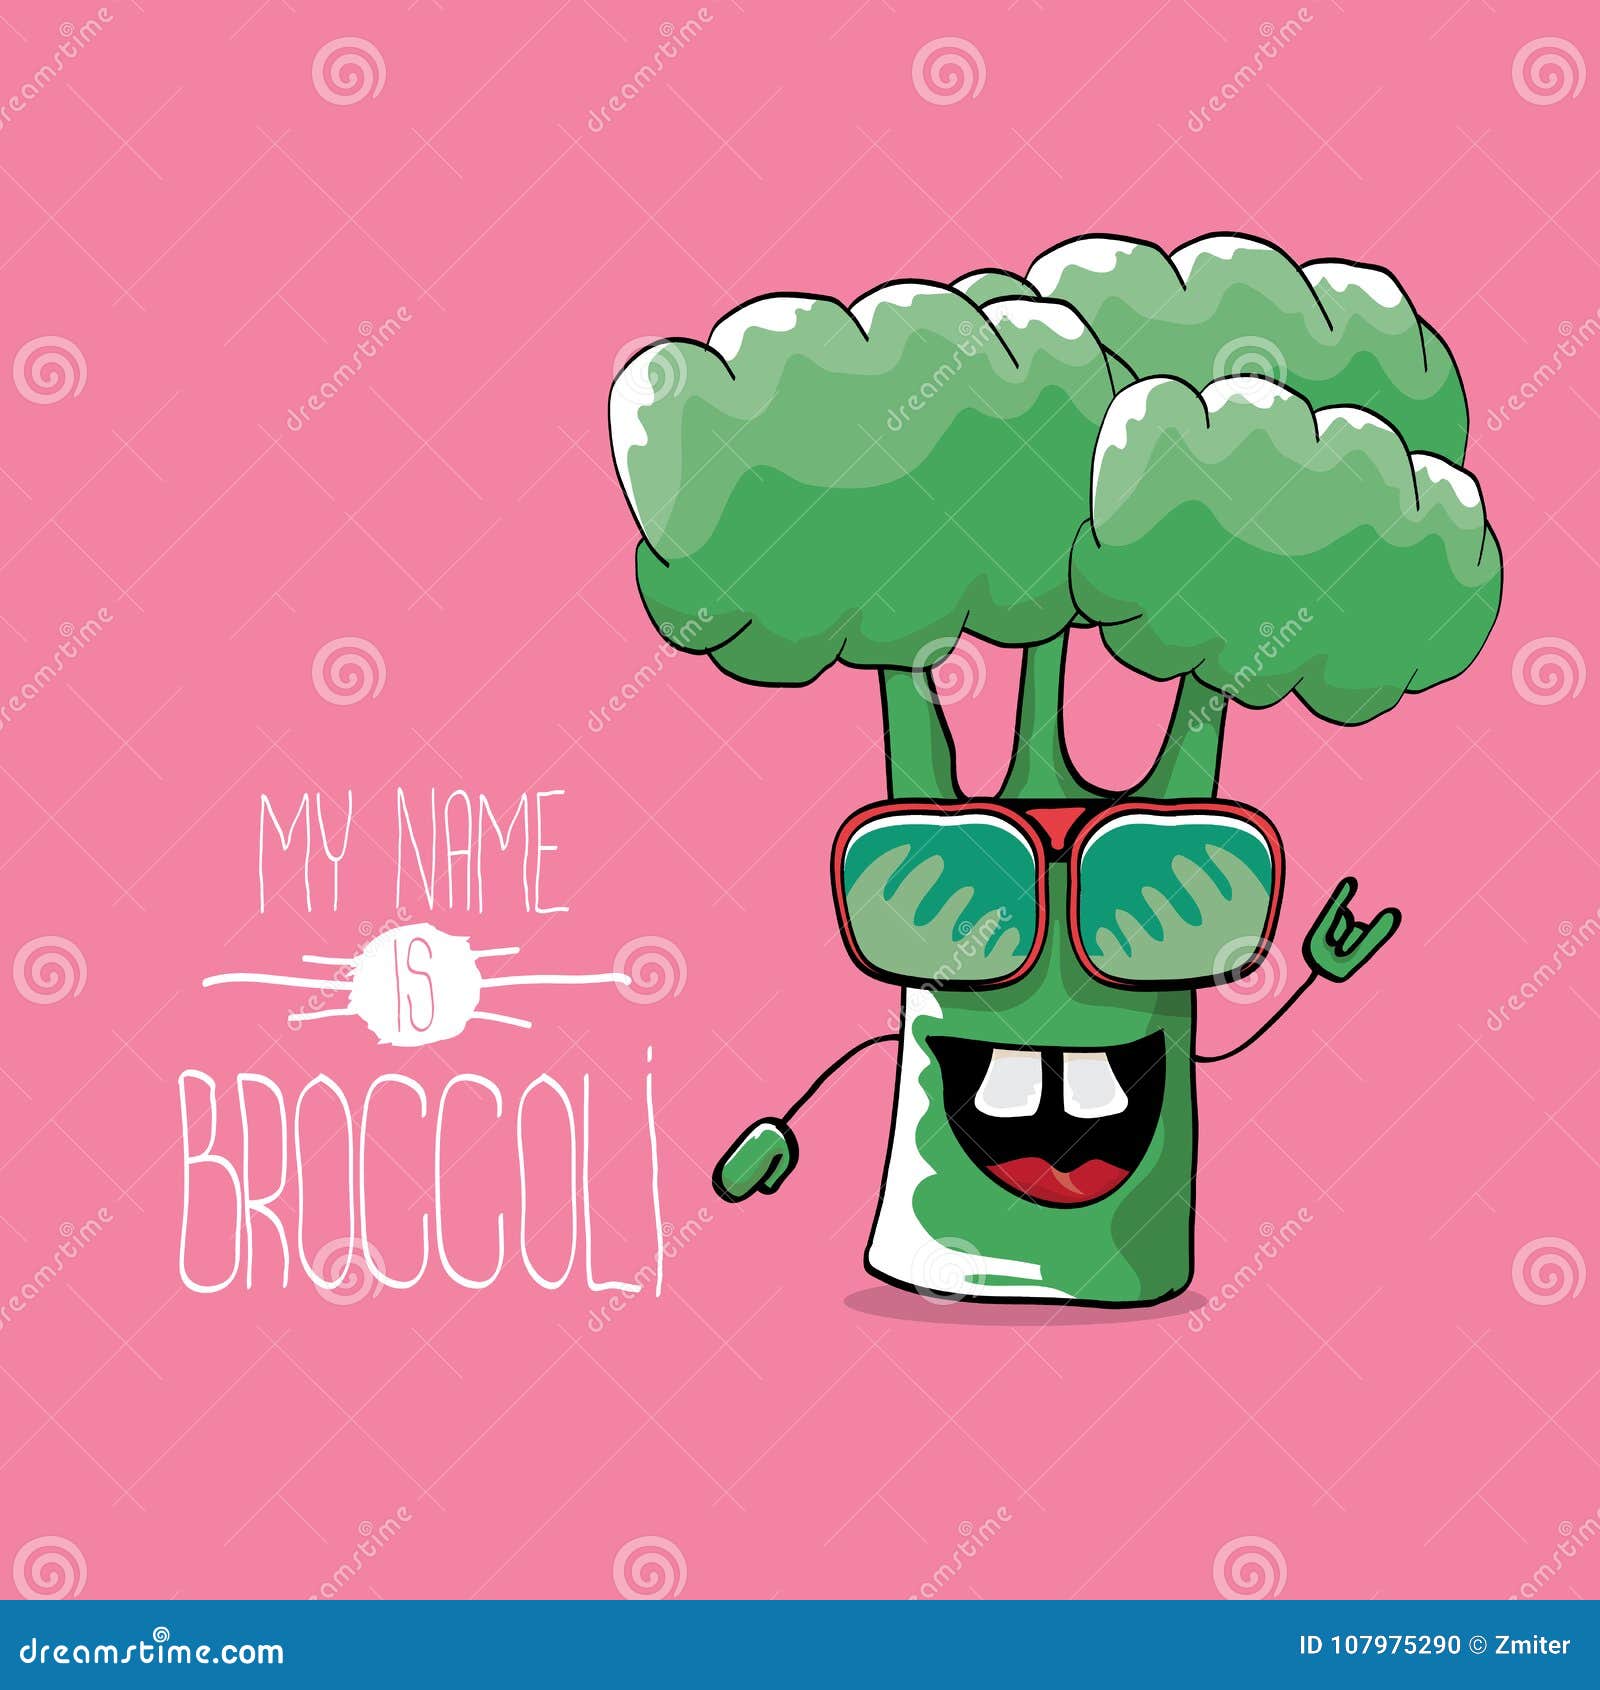 Vector Funny Cartoon Cute Green Smiling Broccoli Character Isolated on Pink  Background. Stock Vector - Illustration of drawing, icon: 107975290